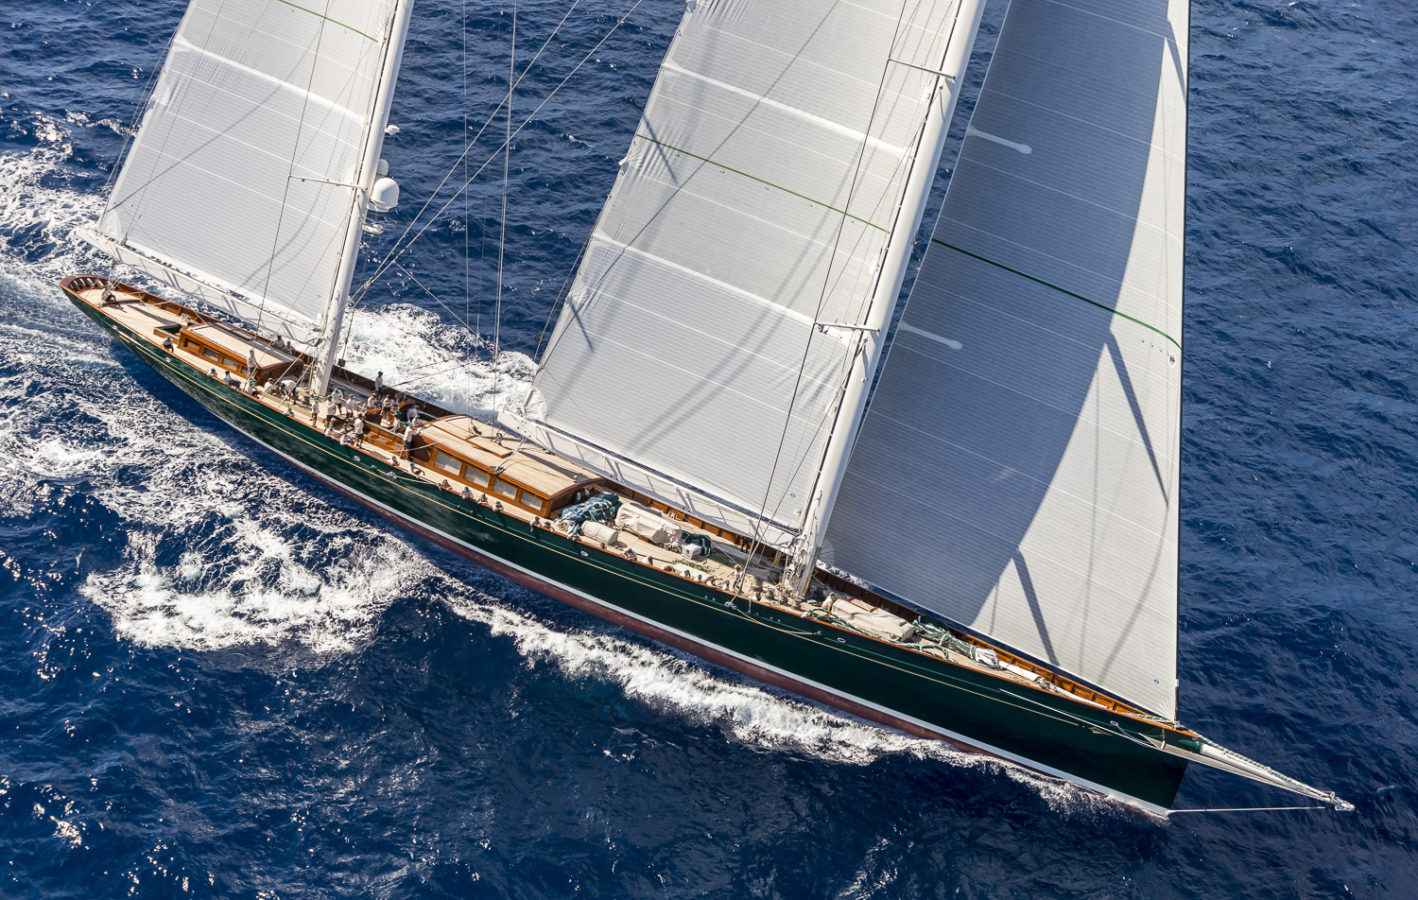 Hetairos Gains Performance With New Sails